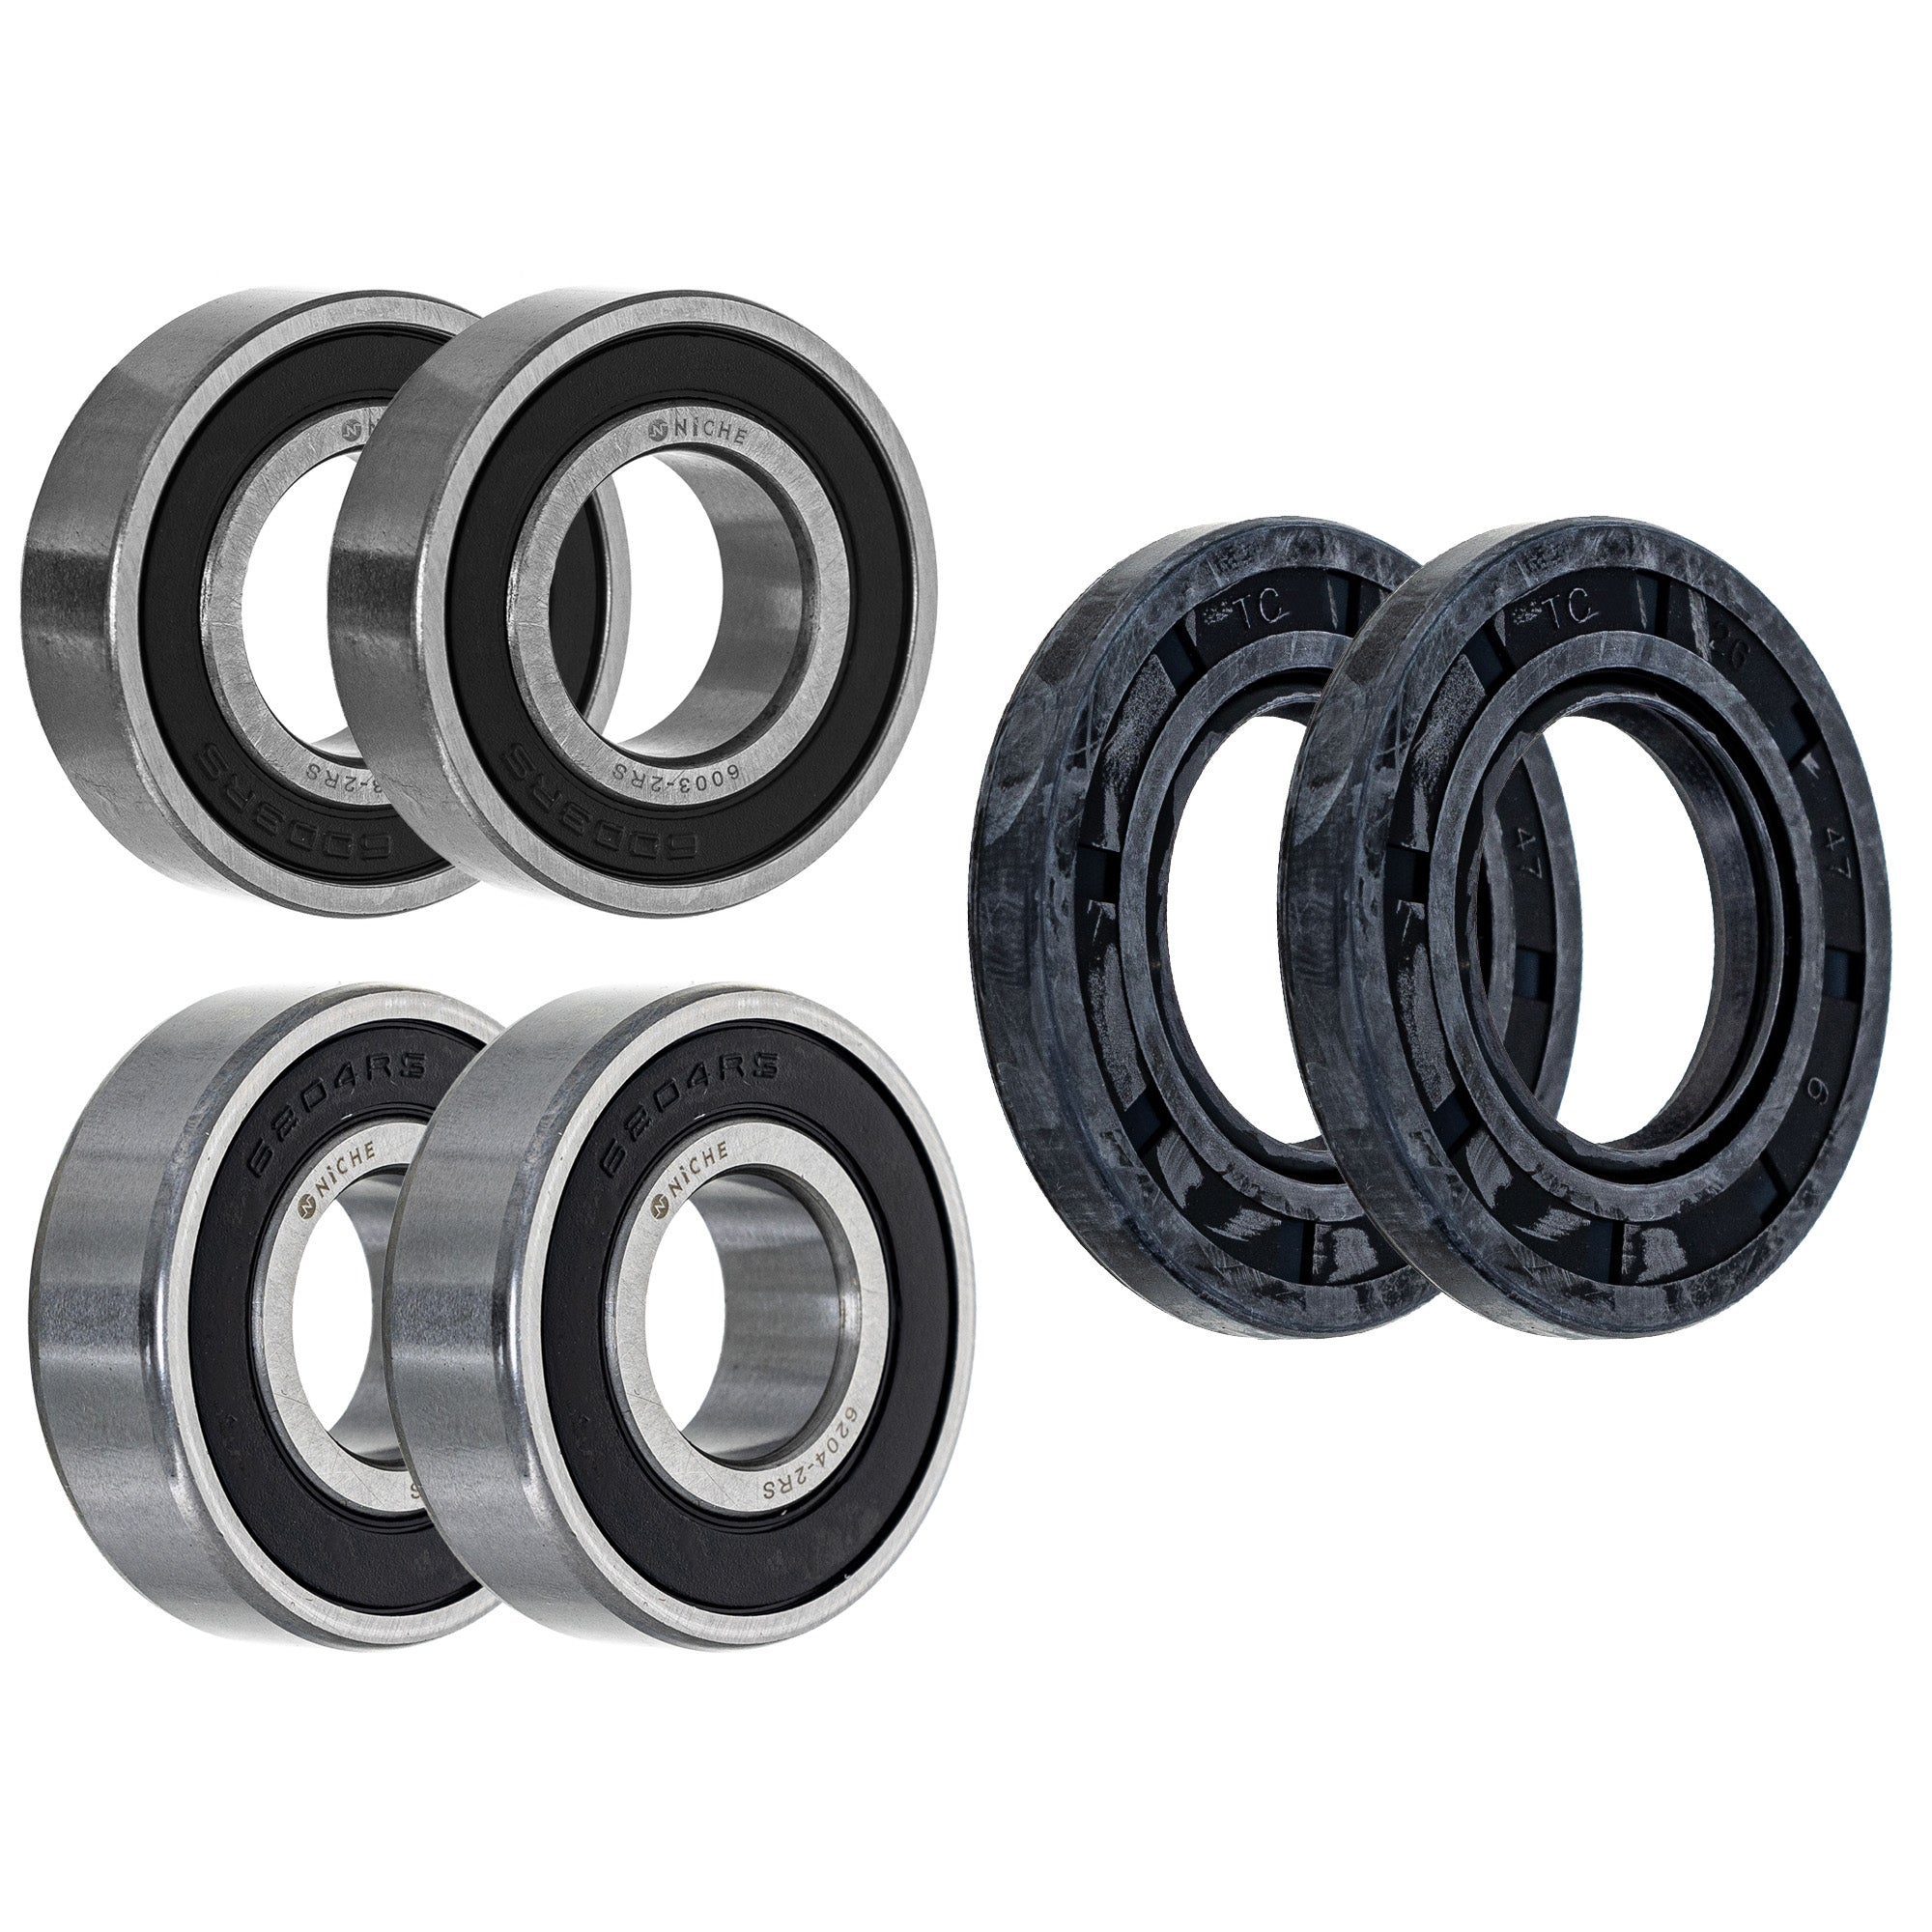 Wheel Bearing Seal Kit for zOTHER Ref No RM250 RM125 NICHE MK1008740